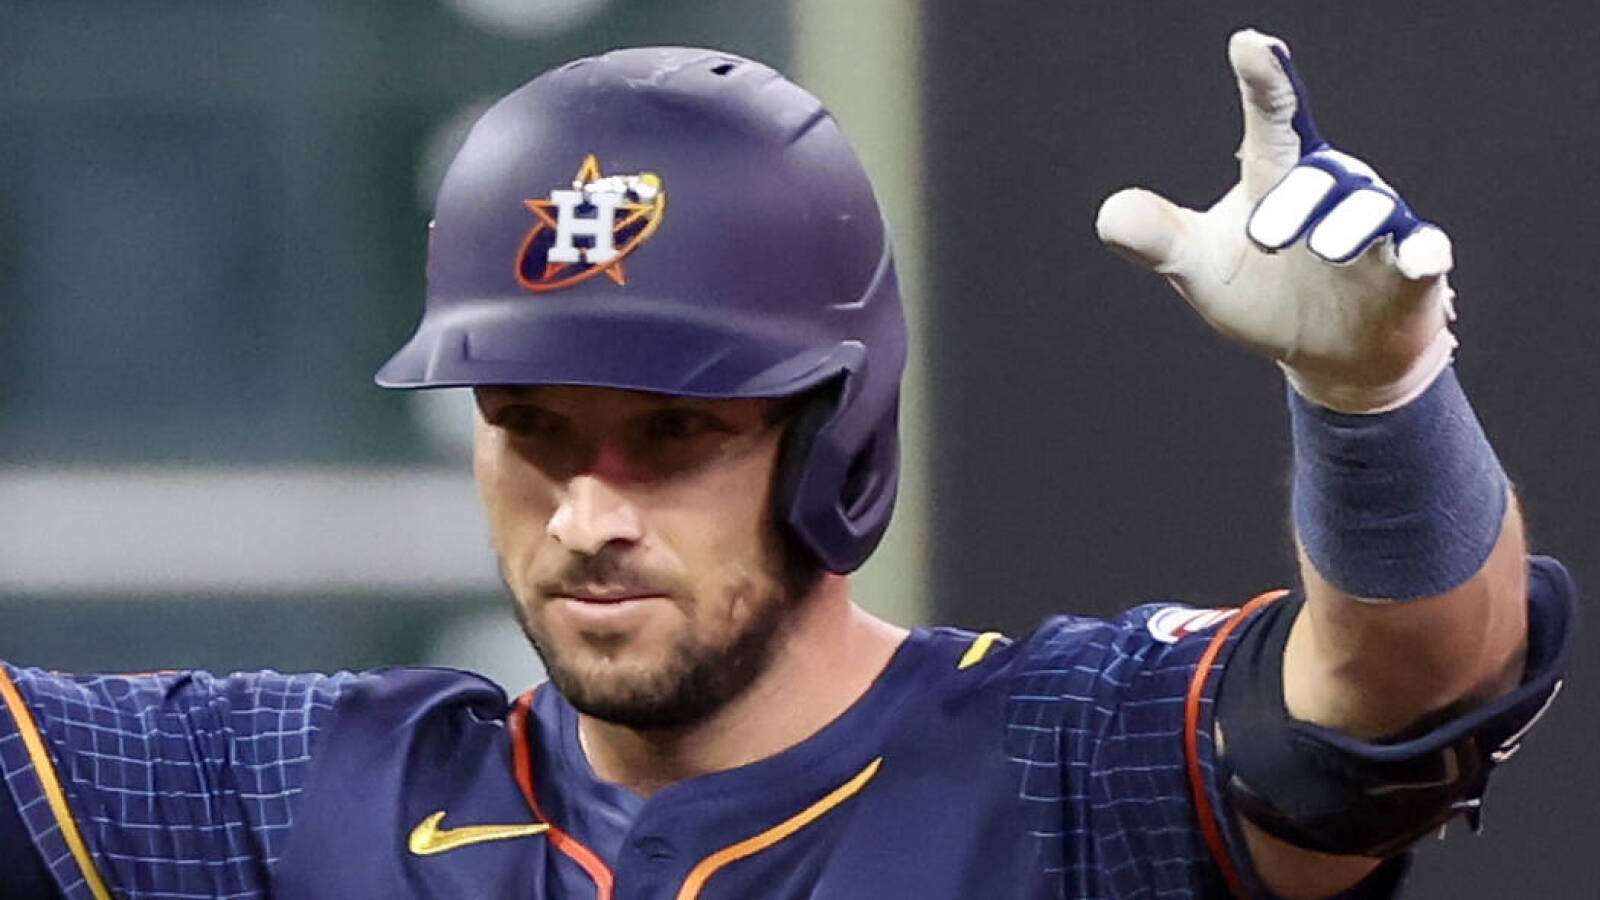 Astros 3B breaks out of slump in contract year